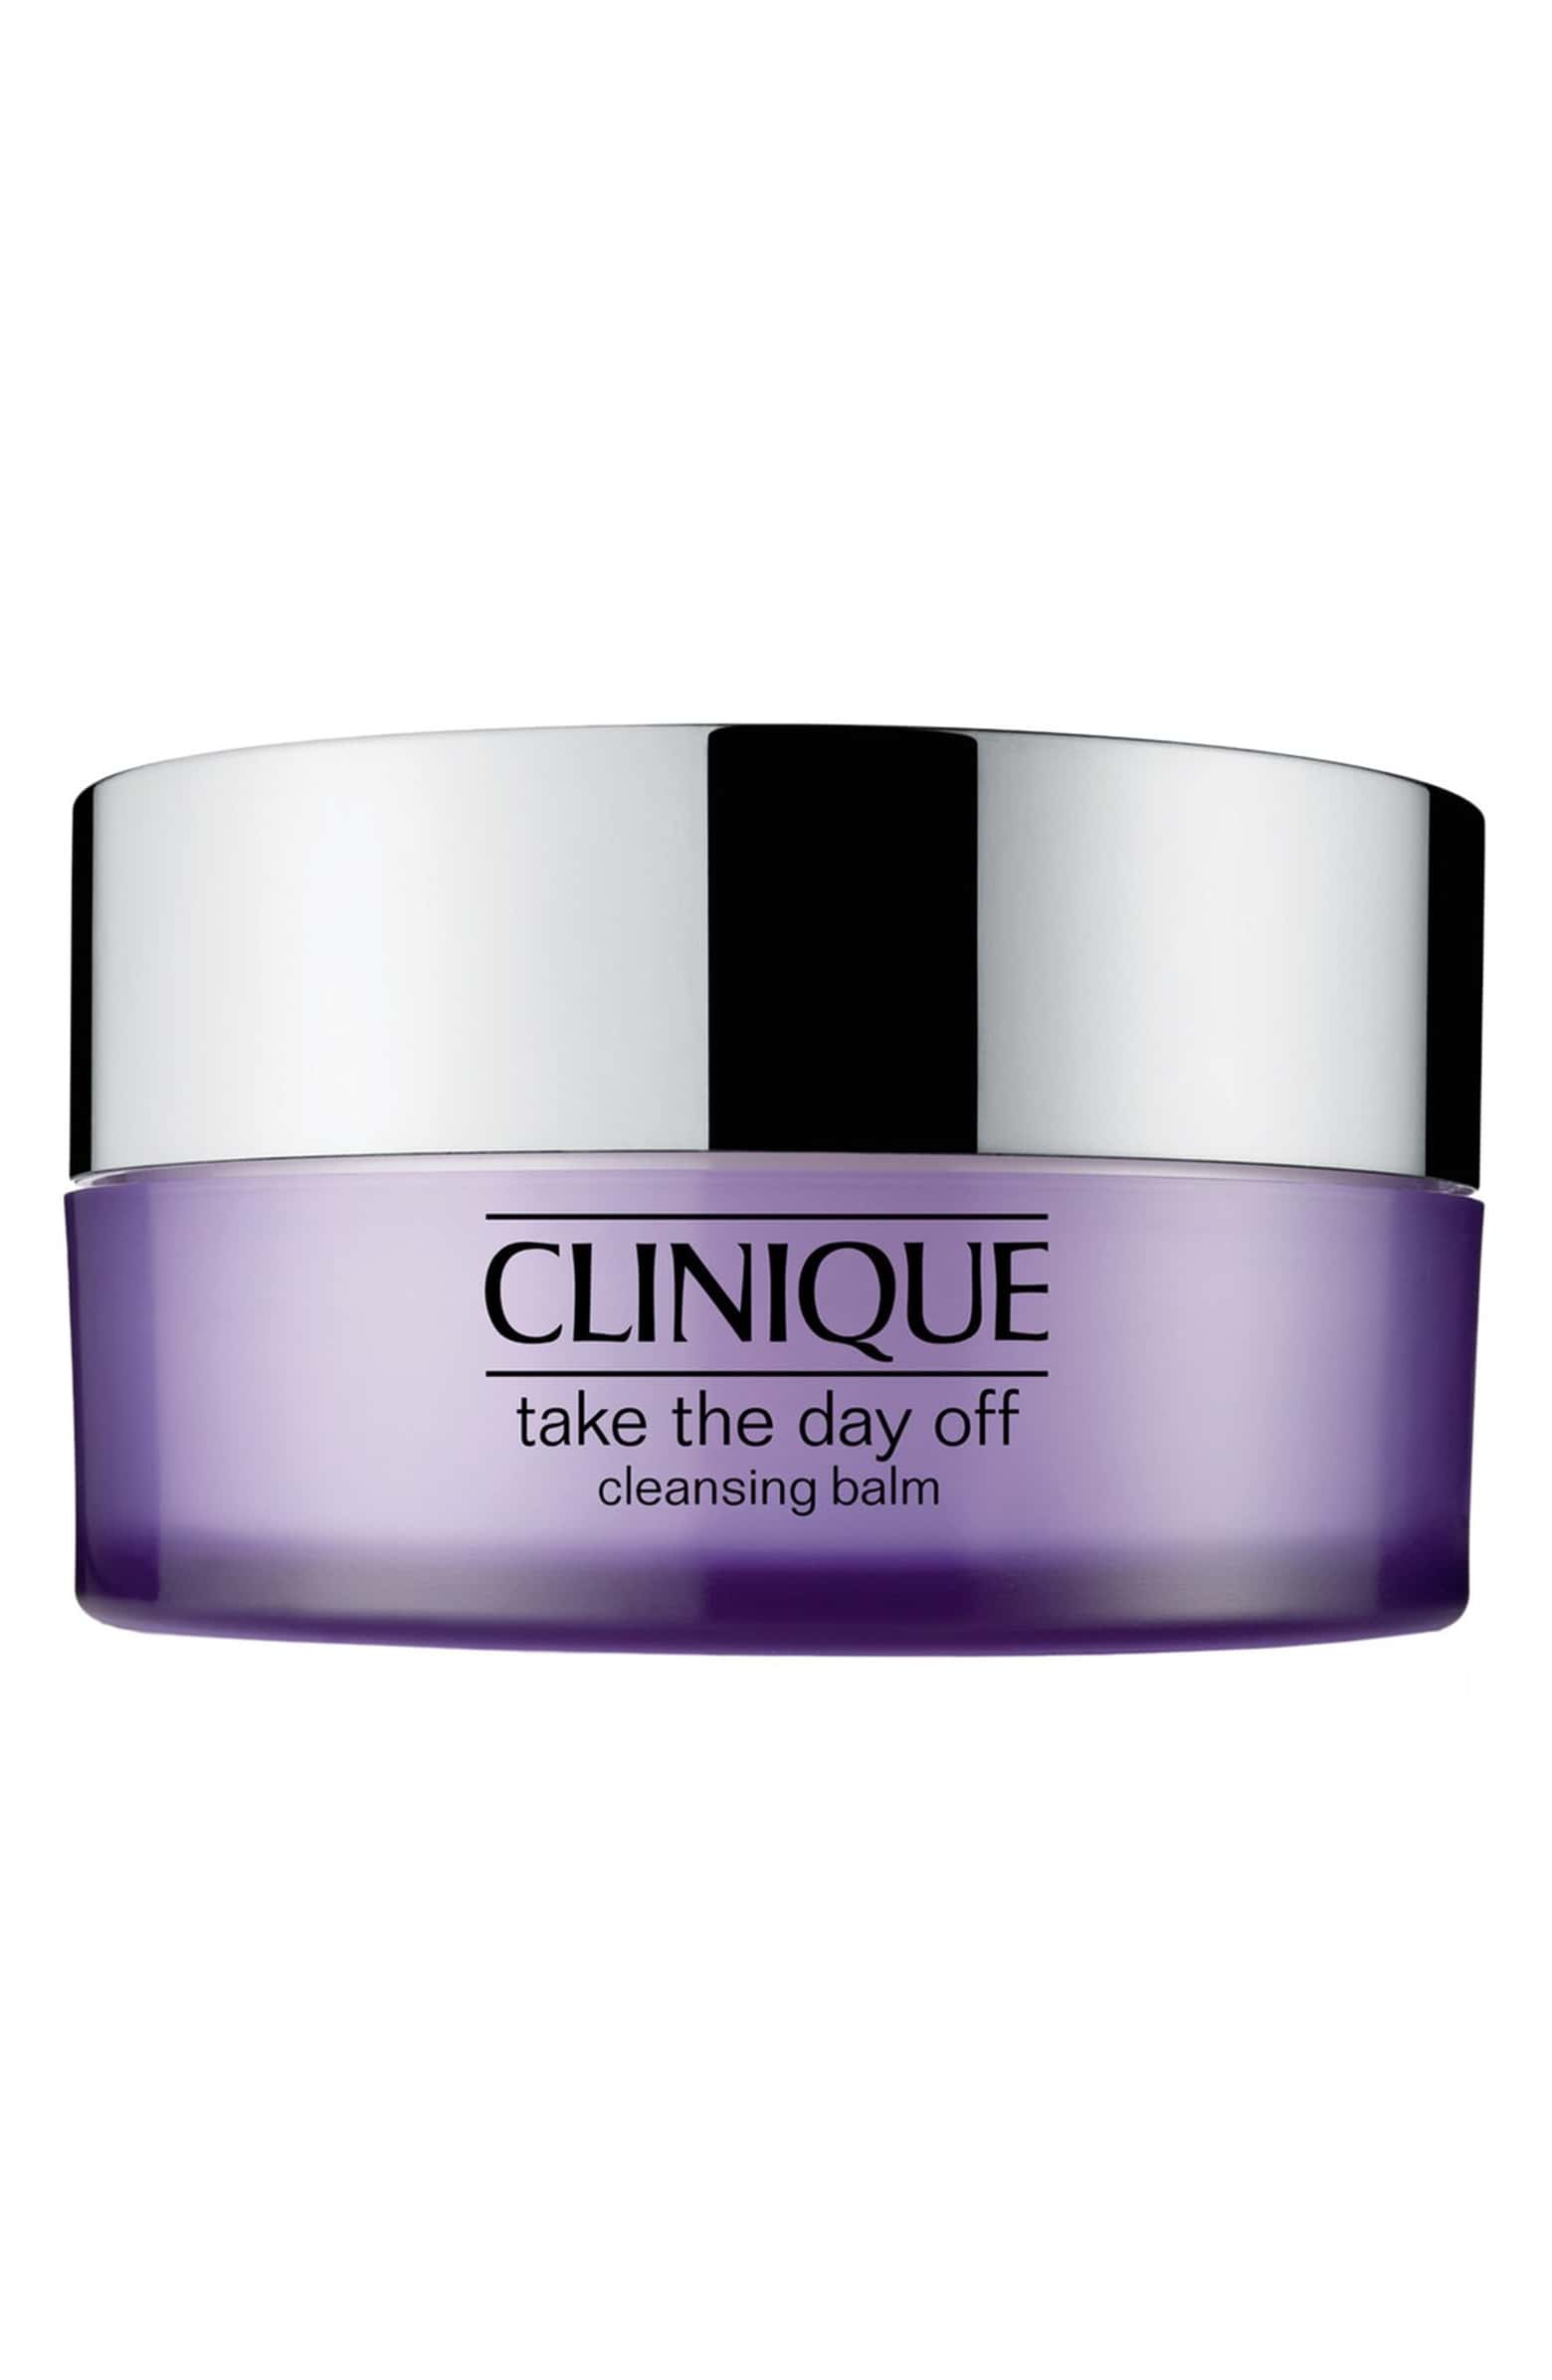 Clinique Take The Day Off Cleansing Balm Image